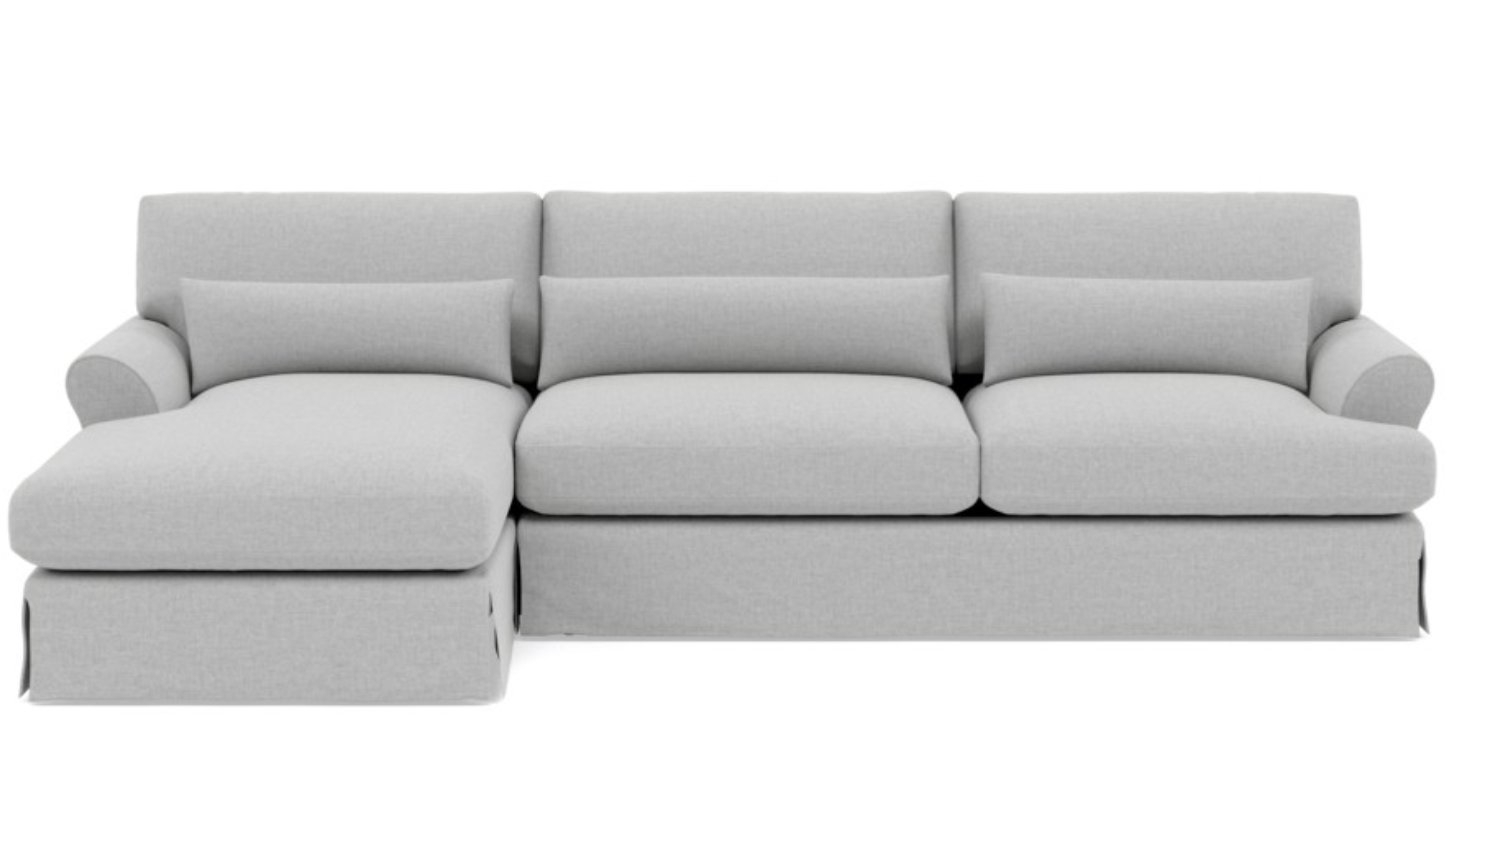 MAXWELL SLIPCOVERED Slipcovered Sectional Sofa with Left Chaise - Image 0